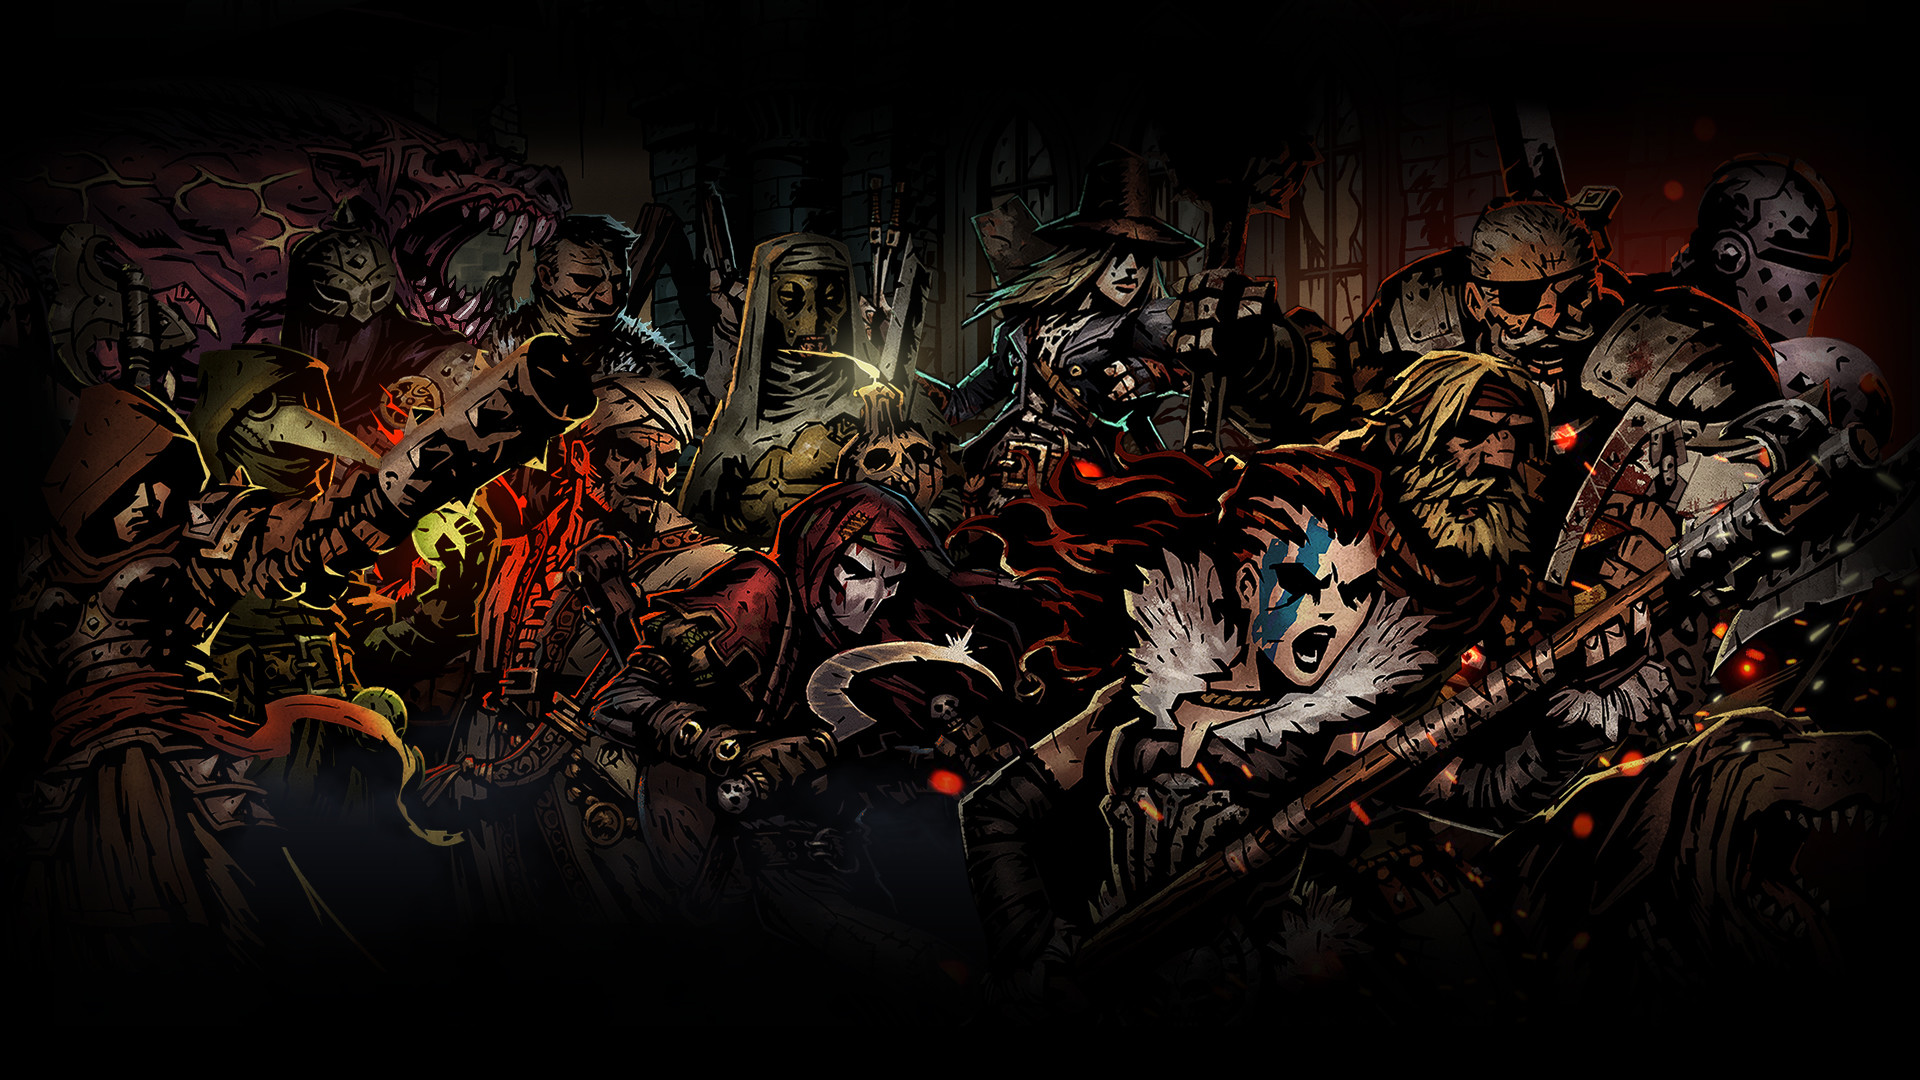 Darkest Dungeon HD Wallpapers and Background Images   stmednet 1920x1080